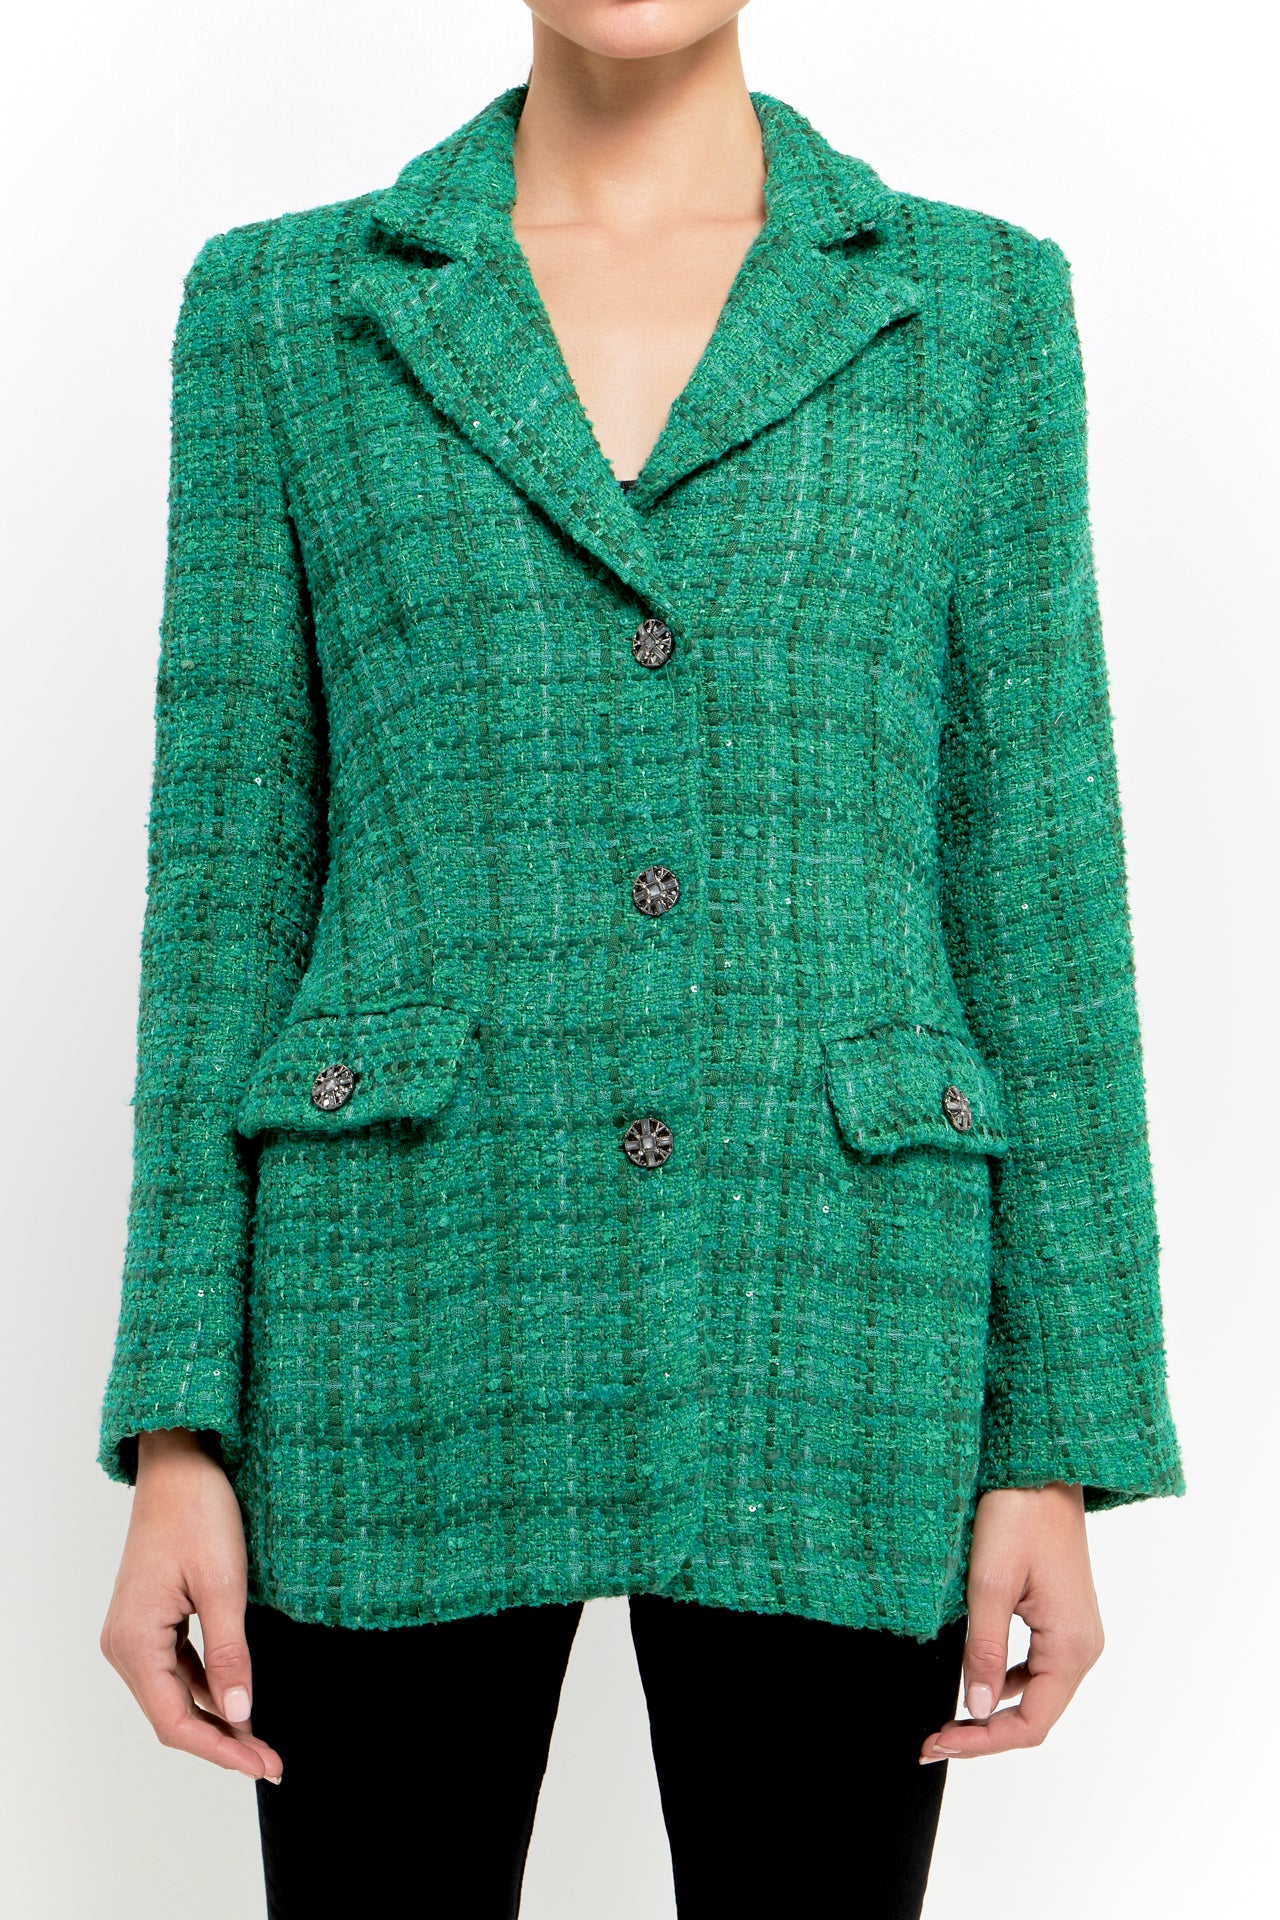 Endless Rose - Tweed 3pc Button Long Blazer - Jackets in Women's Clothing available at endlessrose.com